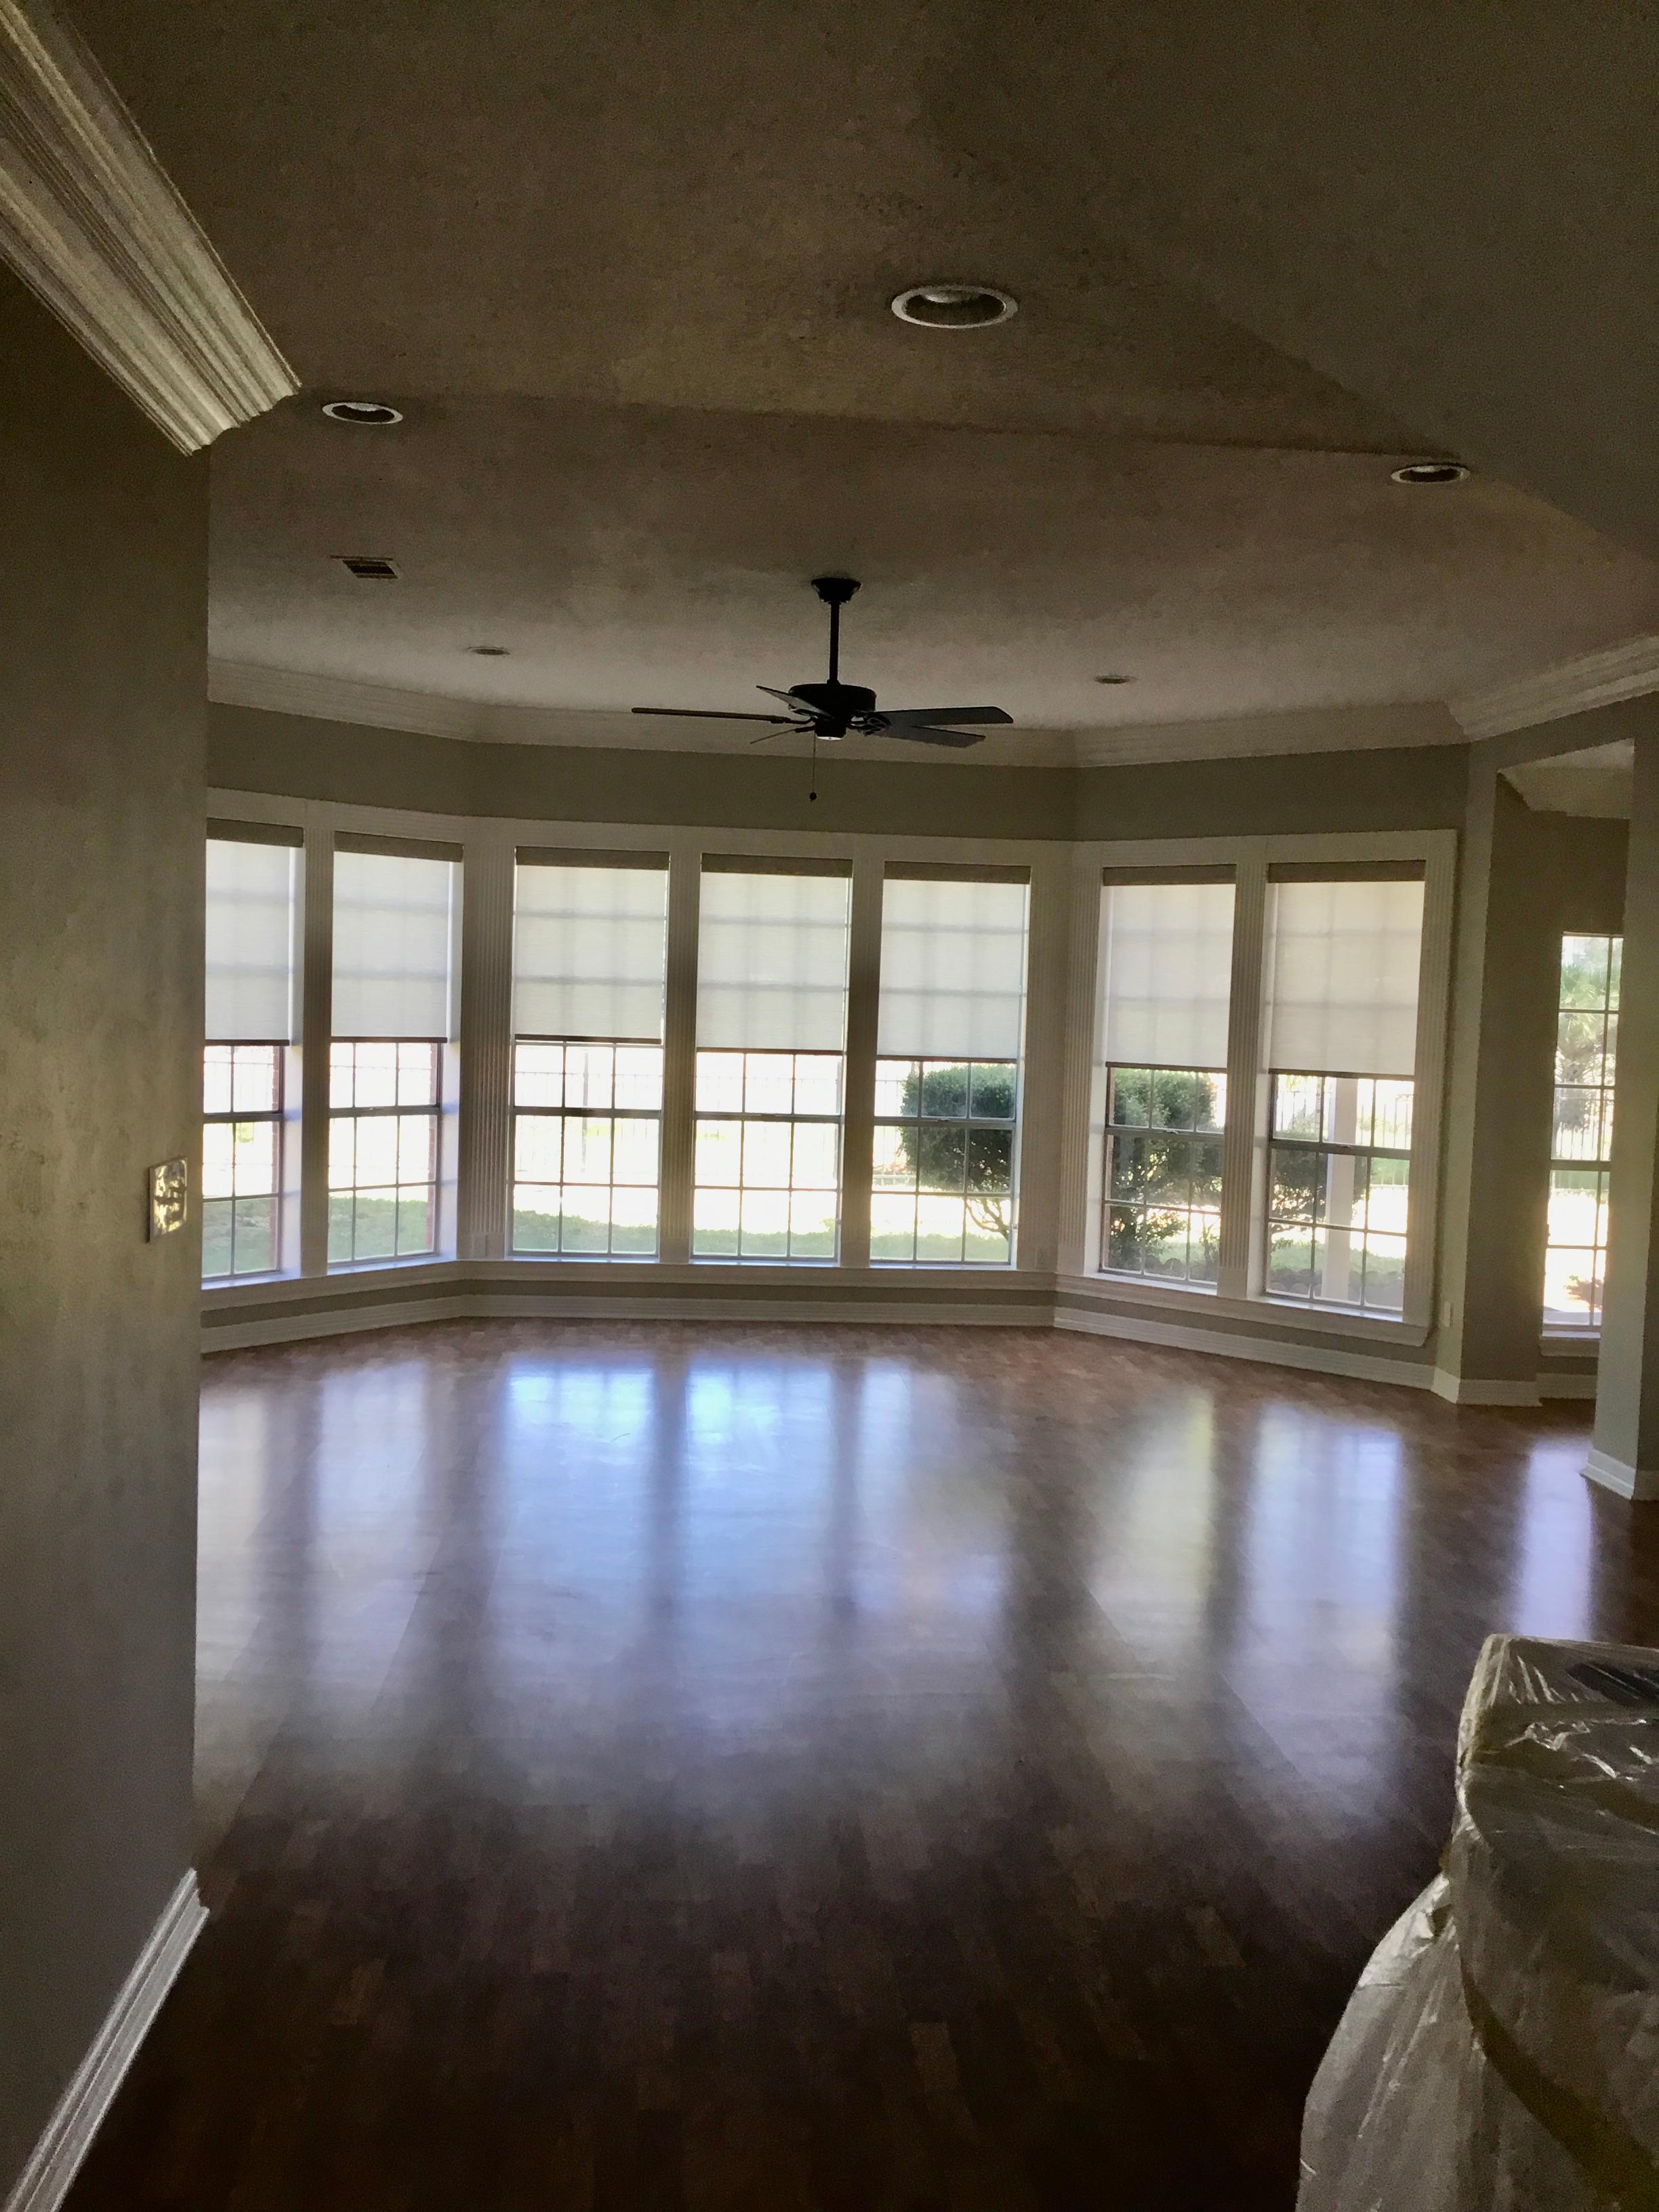 Signature series Roller Shades by Budget Blinds of Katy and Sugar Land bring this wall of windows in Katy, TX to life! They allow the homeowner the freedom to enjoy the view without pesky glares or harsh rays beaming in!